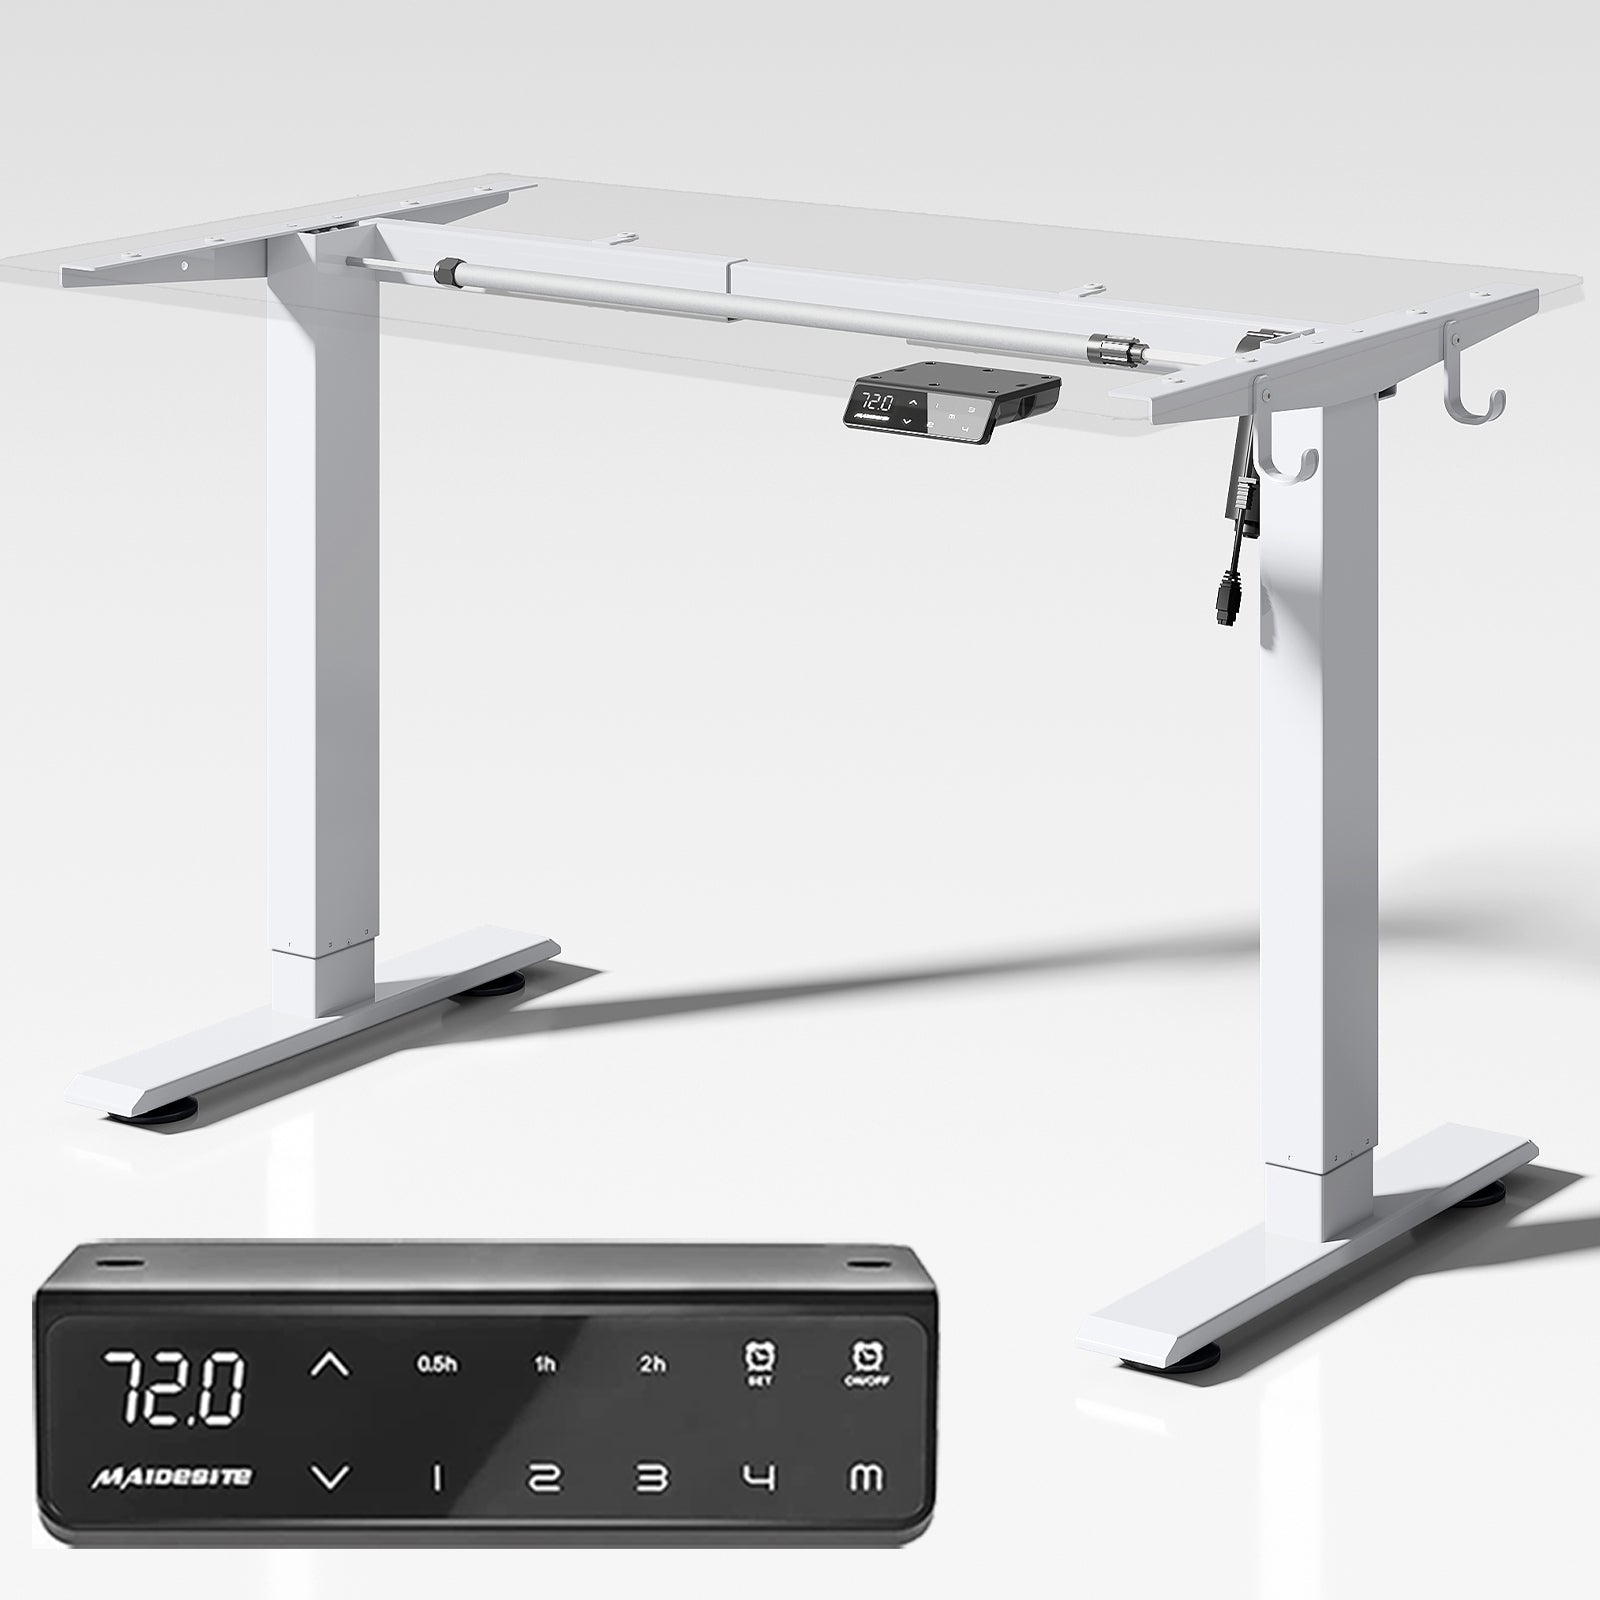 Maidesite S1 Basic Electric height adjustable desk Frame comes with touch control panel with 4 memory heights